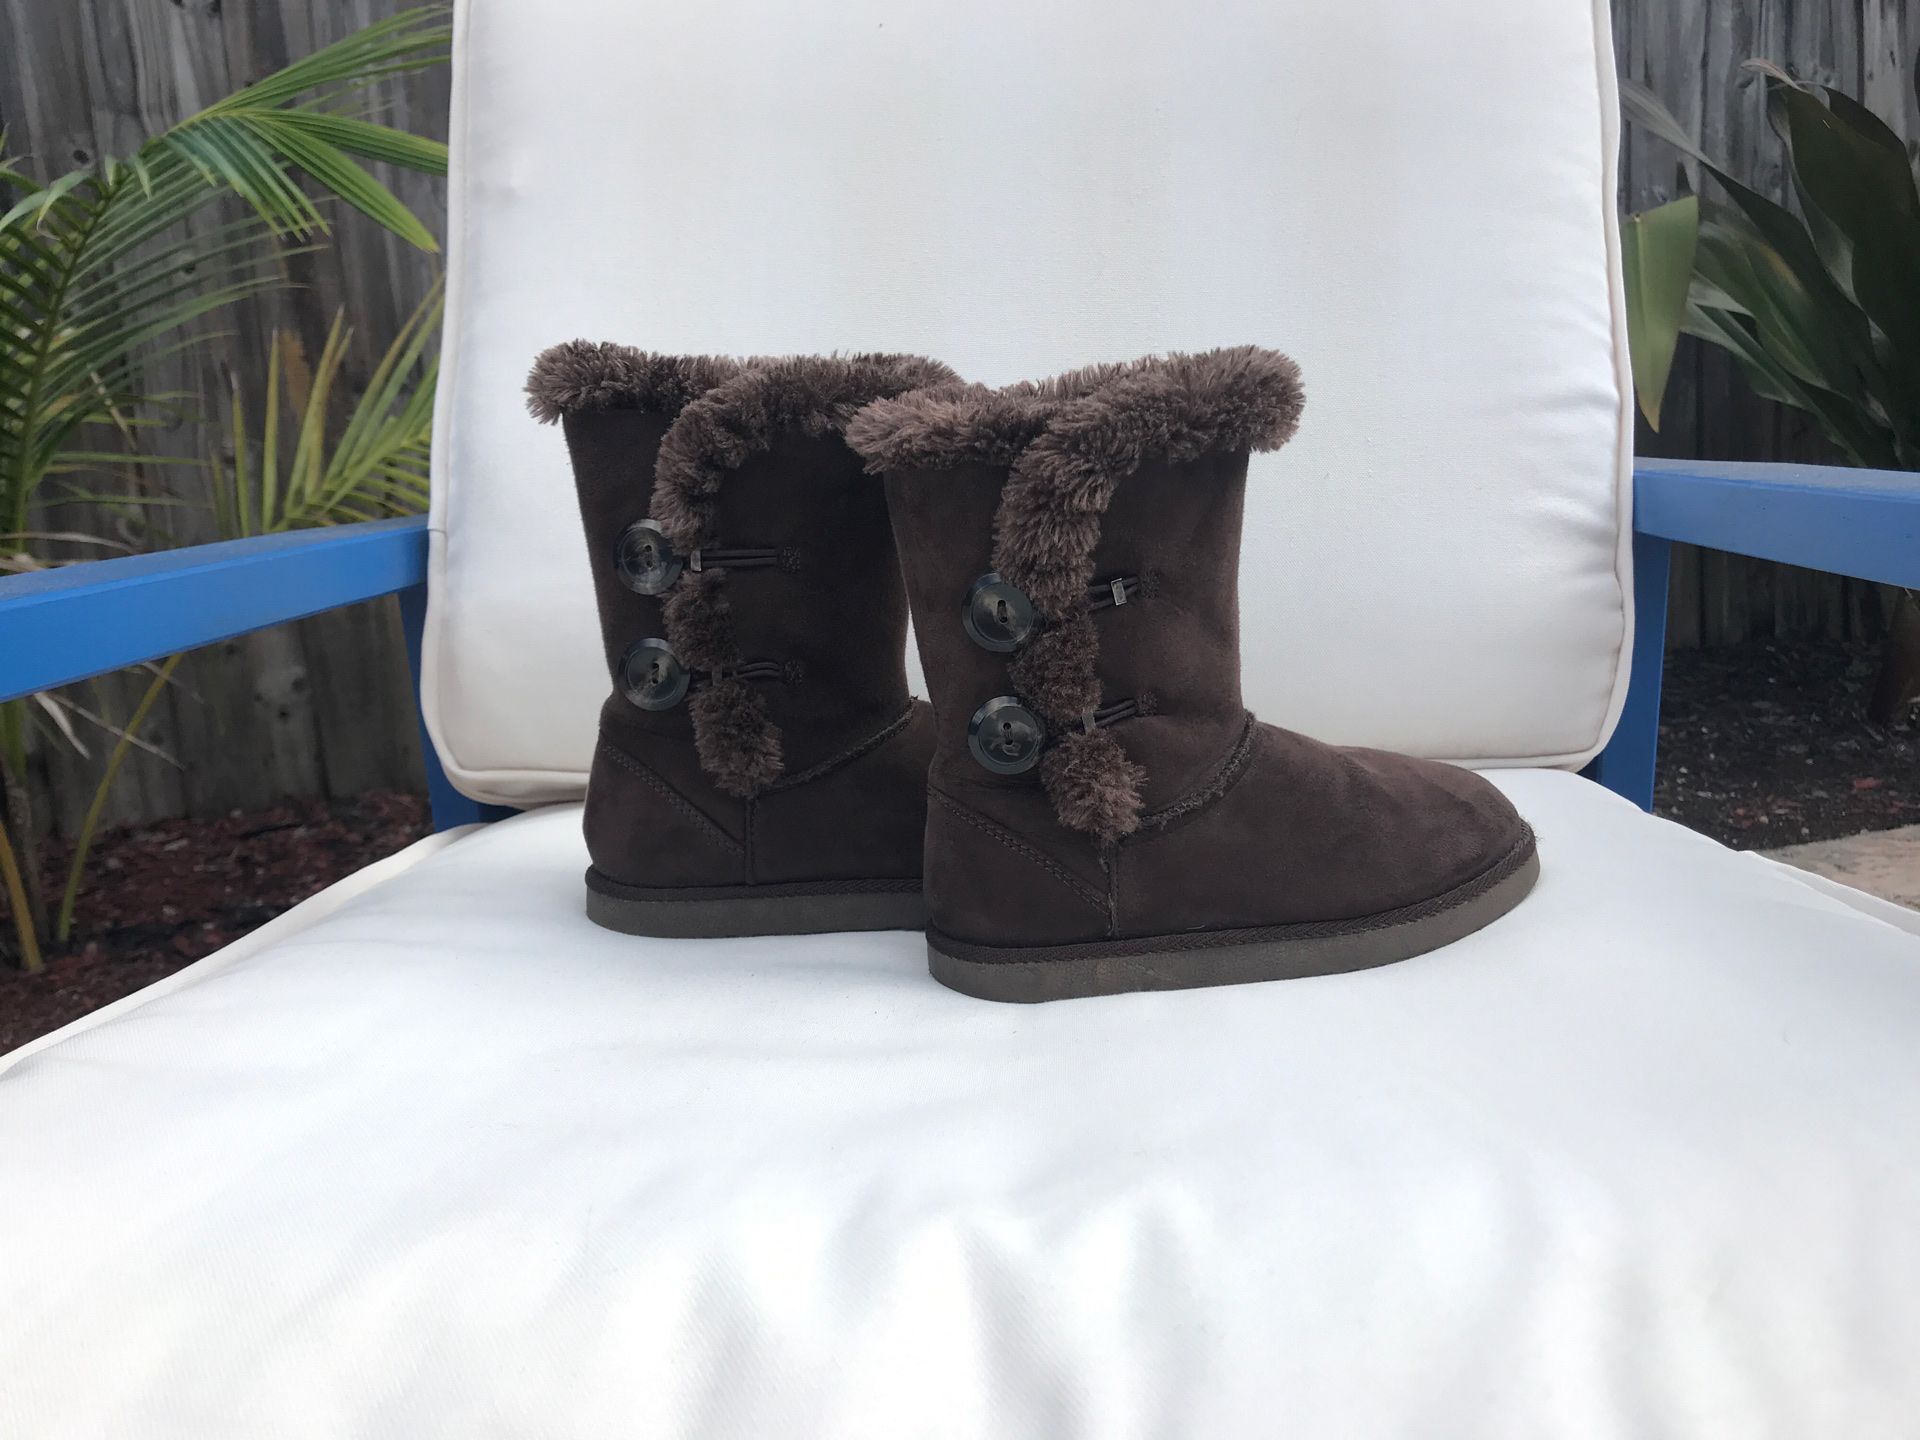 JUST REDUCED: Girls Boots - Size 13 in Brown